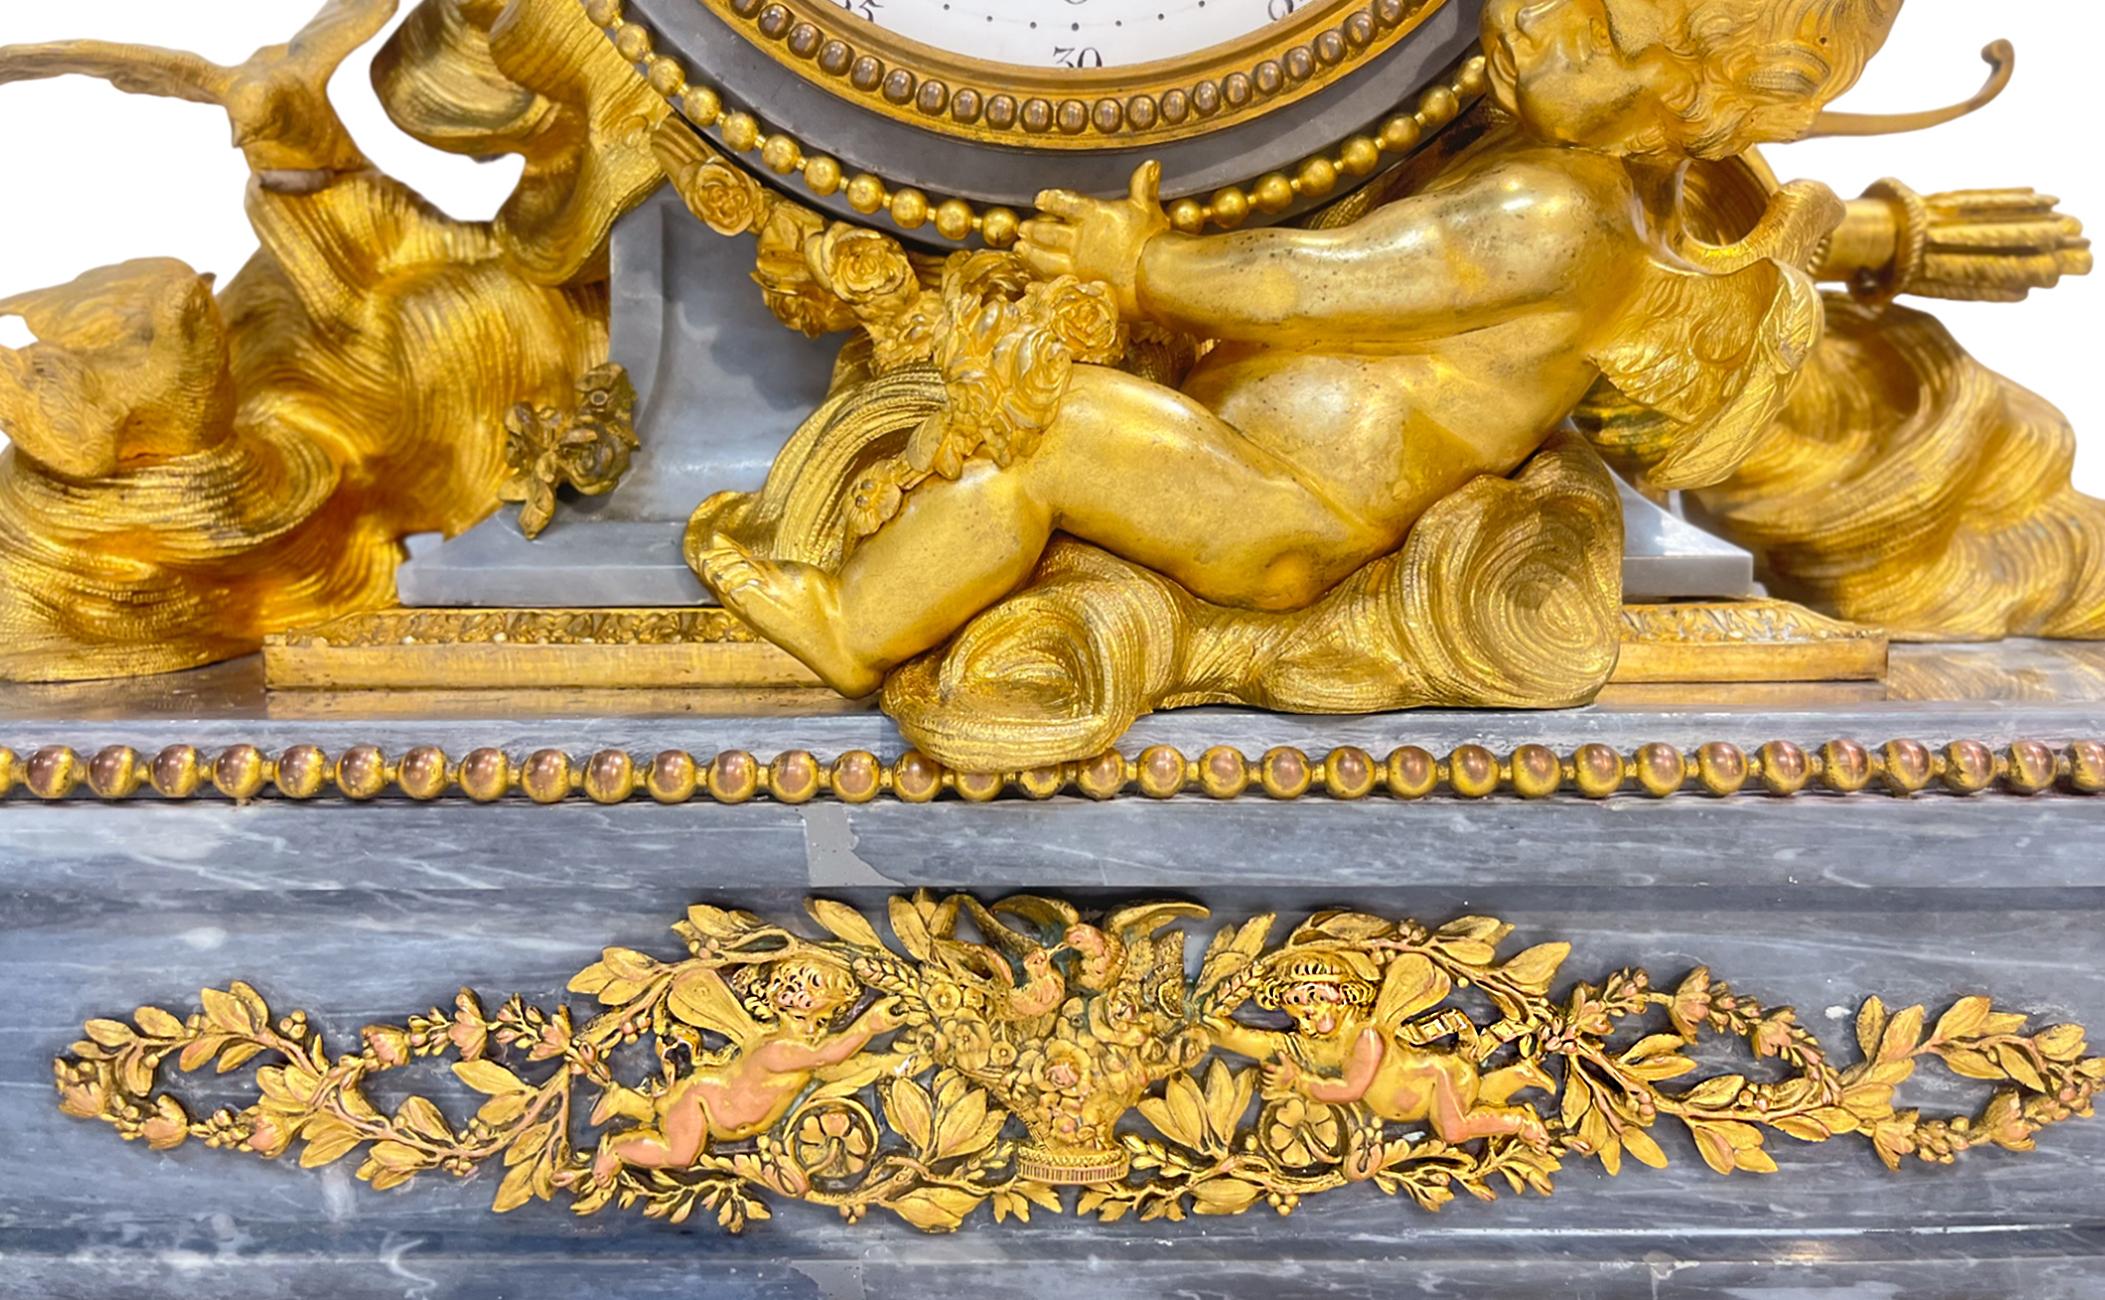 Monumental Louis XV Style Gilt-Bronze and Marble Clock with Putti in the Clouds For Sale 2